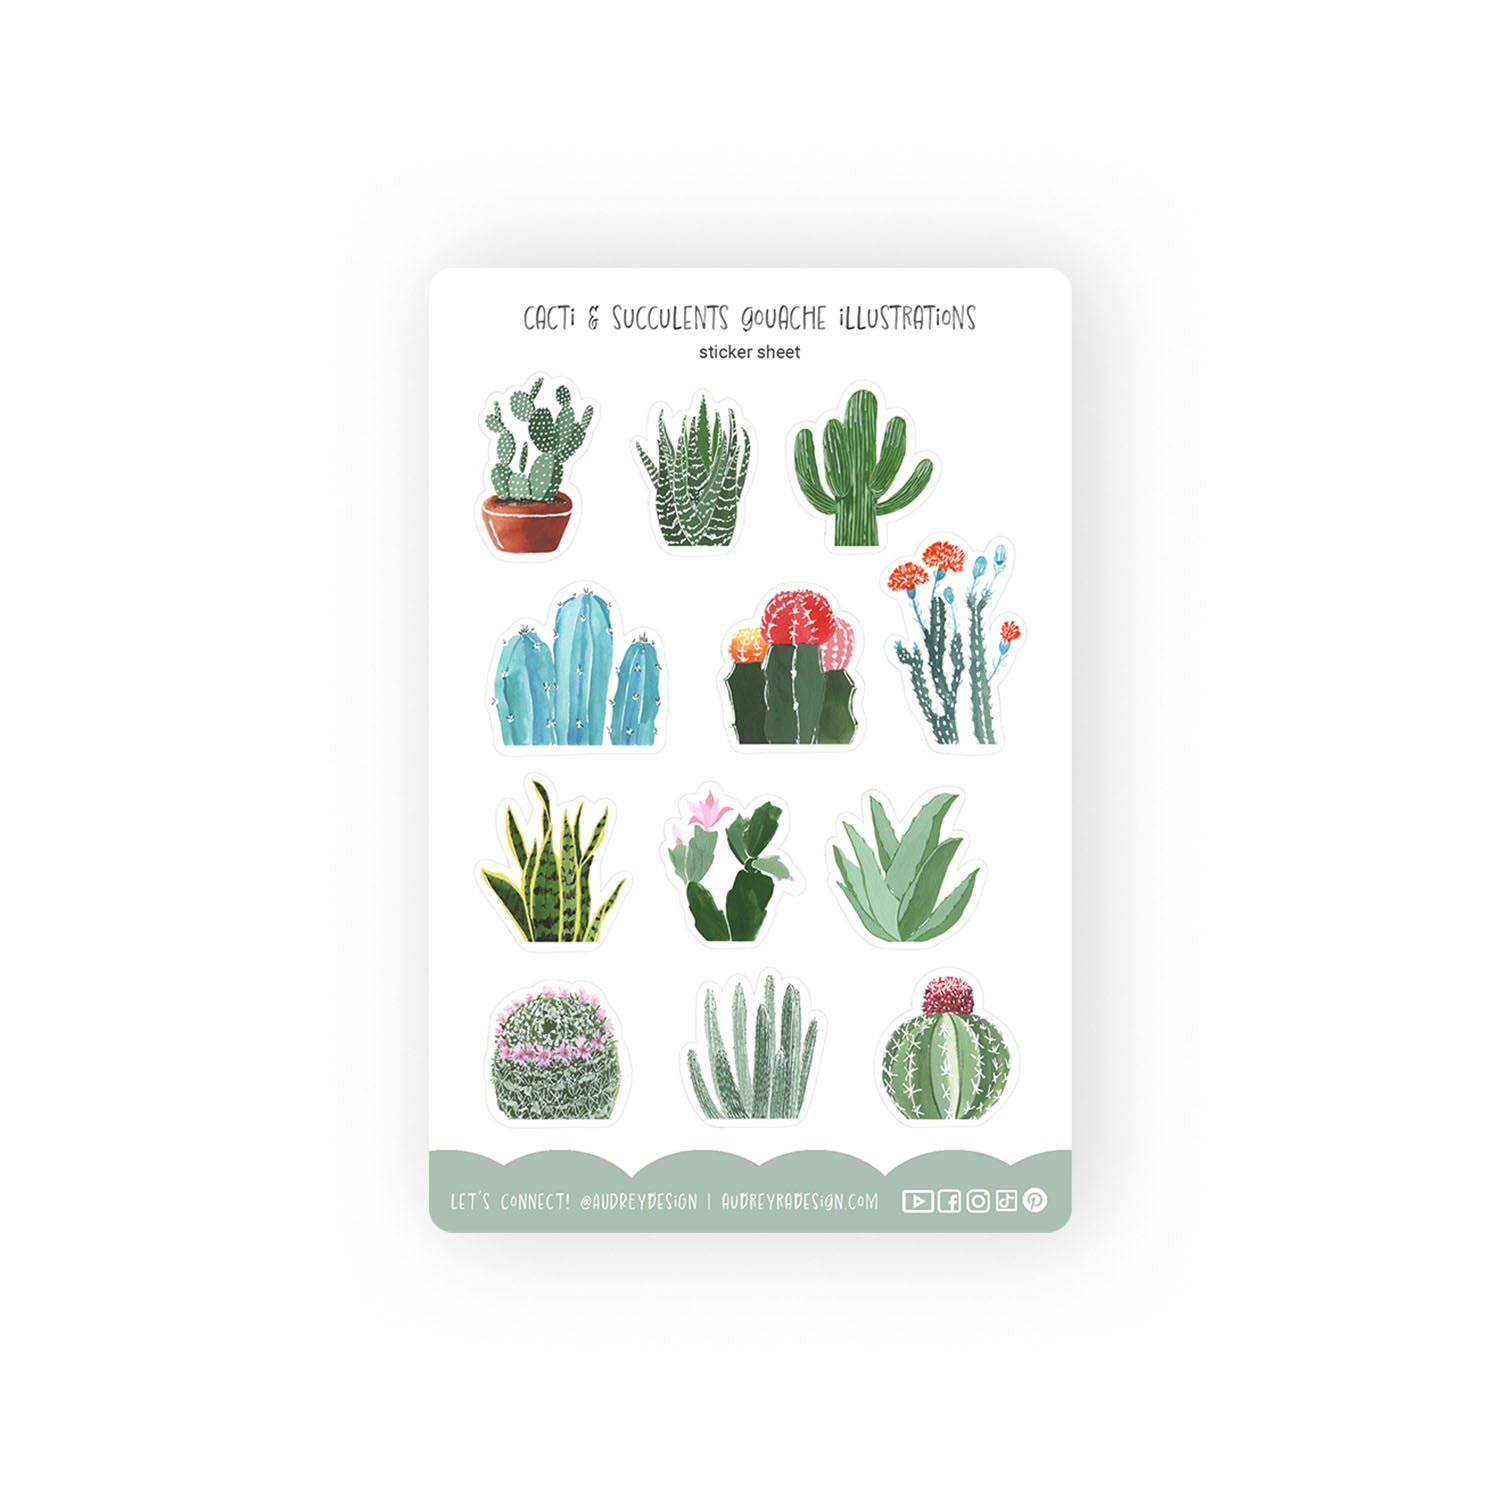 A white rectangle filled with various and colorful cacti and succulents. Text across the top reads "Cacti & Succulents Gouache Illustrations" and across the bottom it has social media icons for Audrey Ra Design.